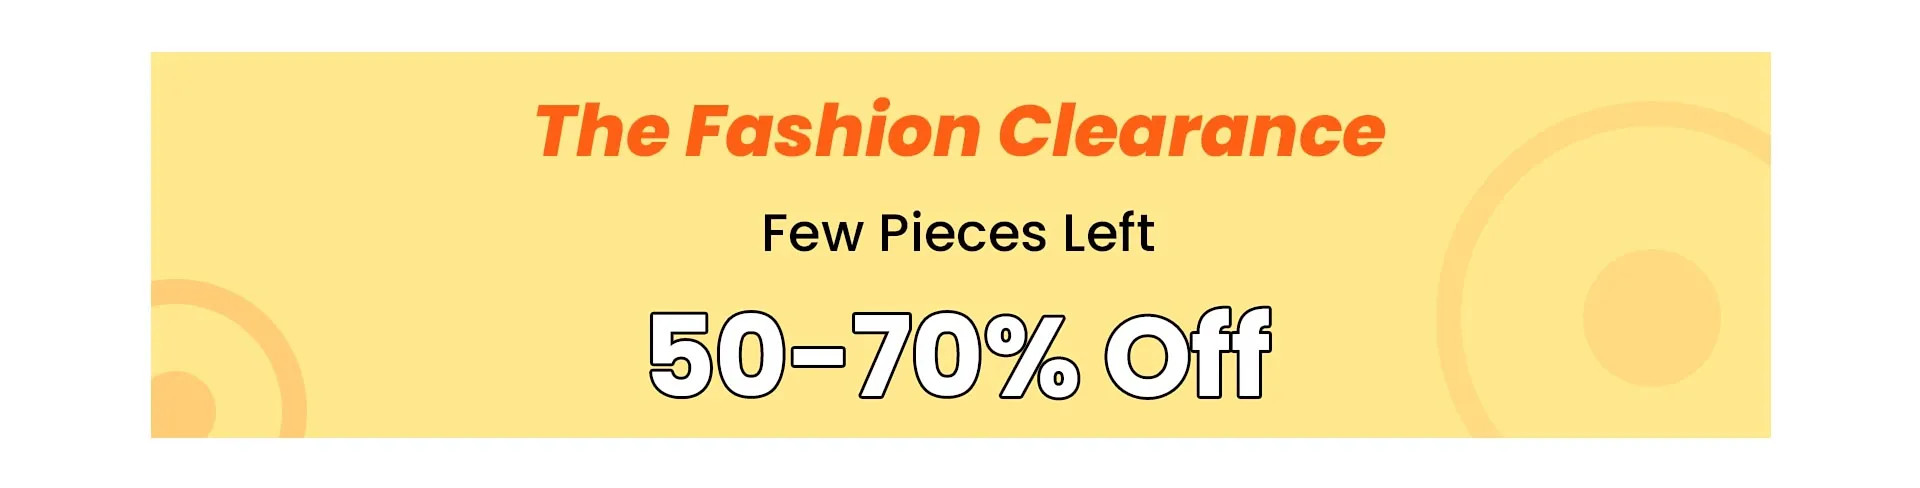 TheFashionClearance_FH_Header_App_Clothes_All_All_FH_Cpid-467_20221025_